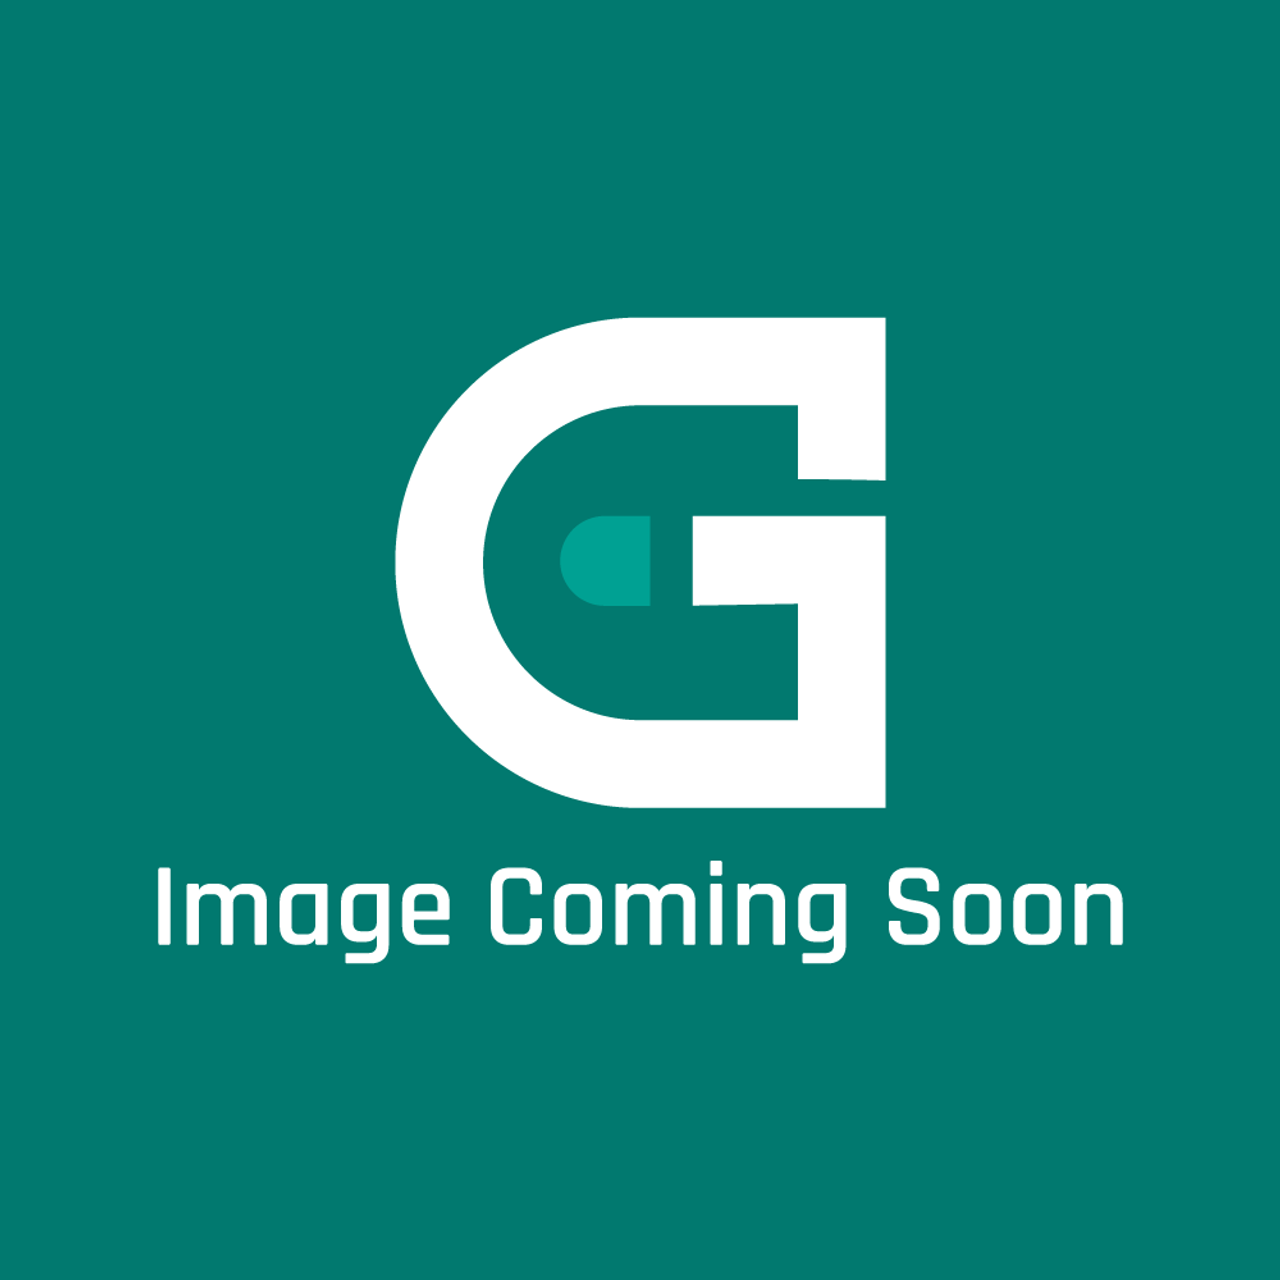 Market Forge 92-0098 - Ignitor Dirct Cp052401 - Image Coming Soon!